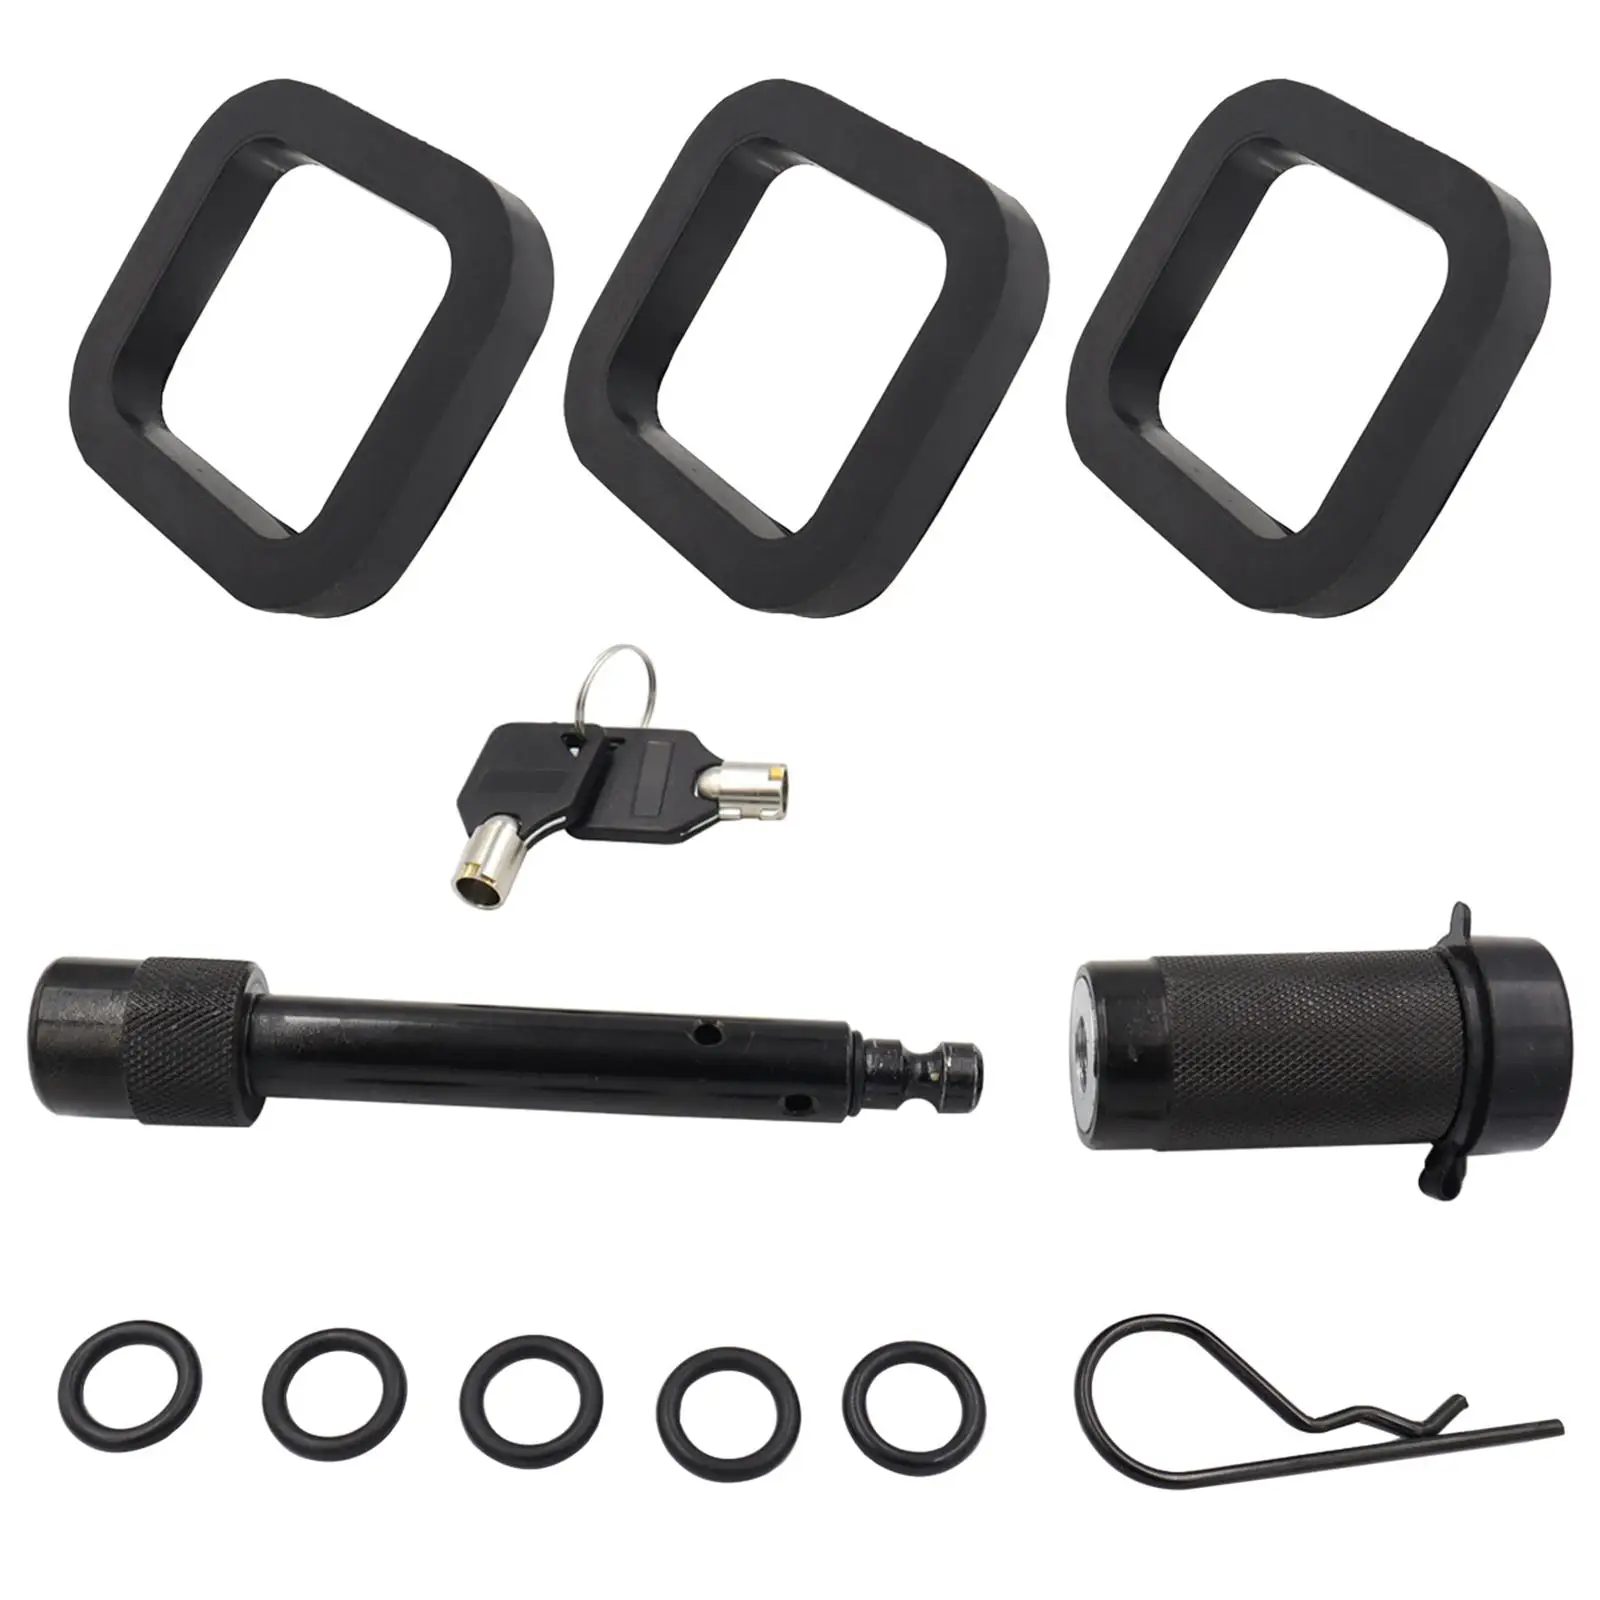 

5/8 Inches Trailer Hitch Locks Kit for Tow Trailer, Car, Boat ,Black